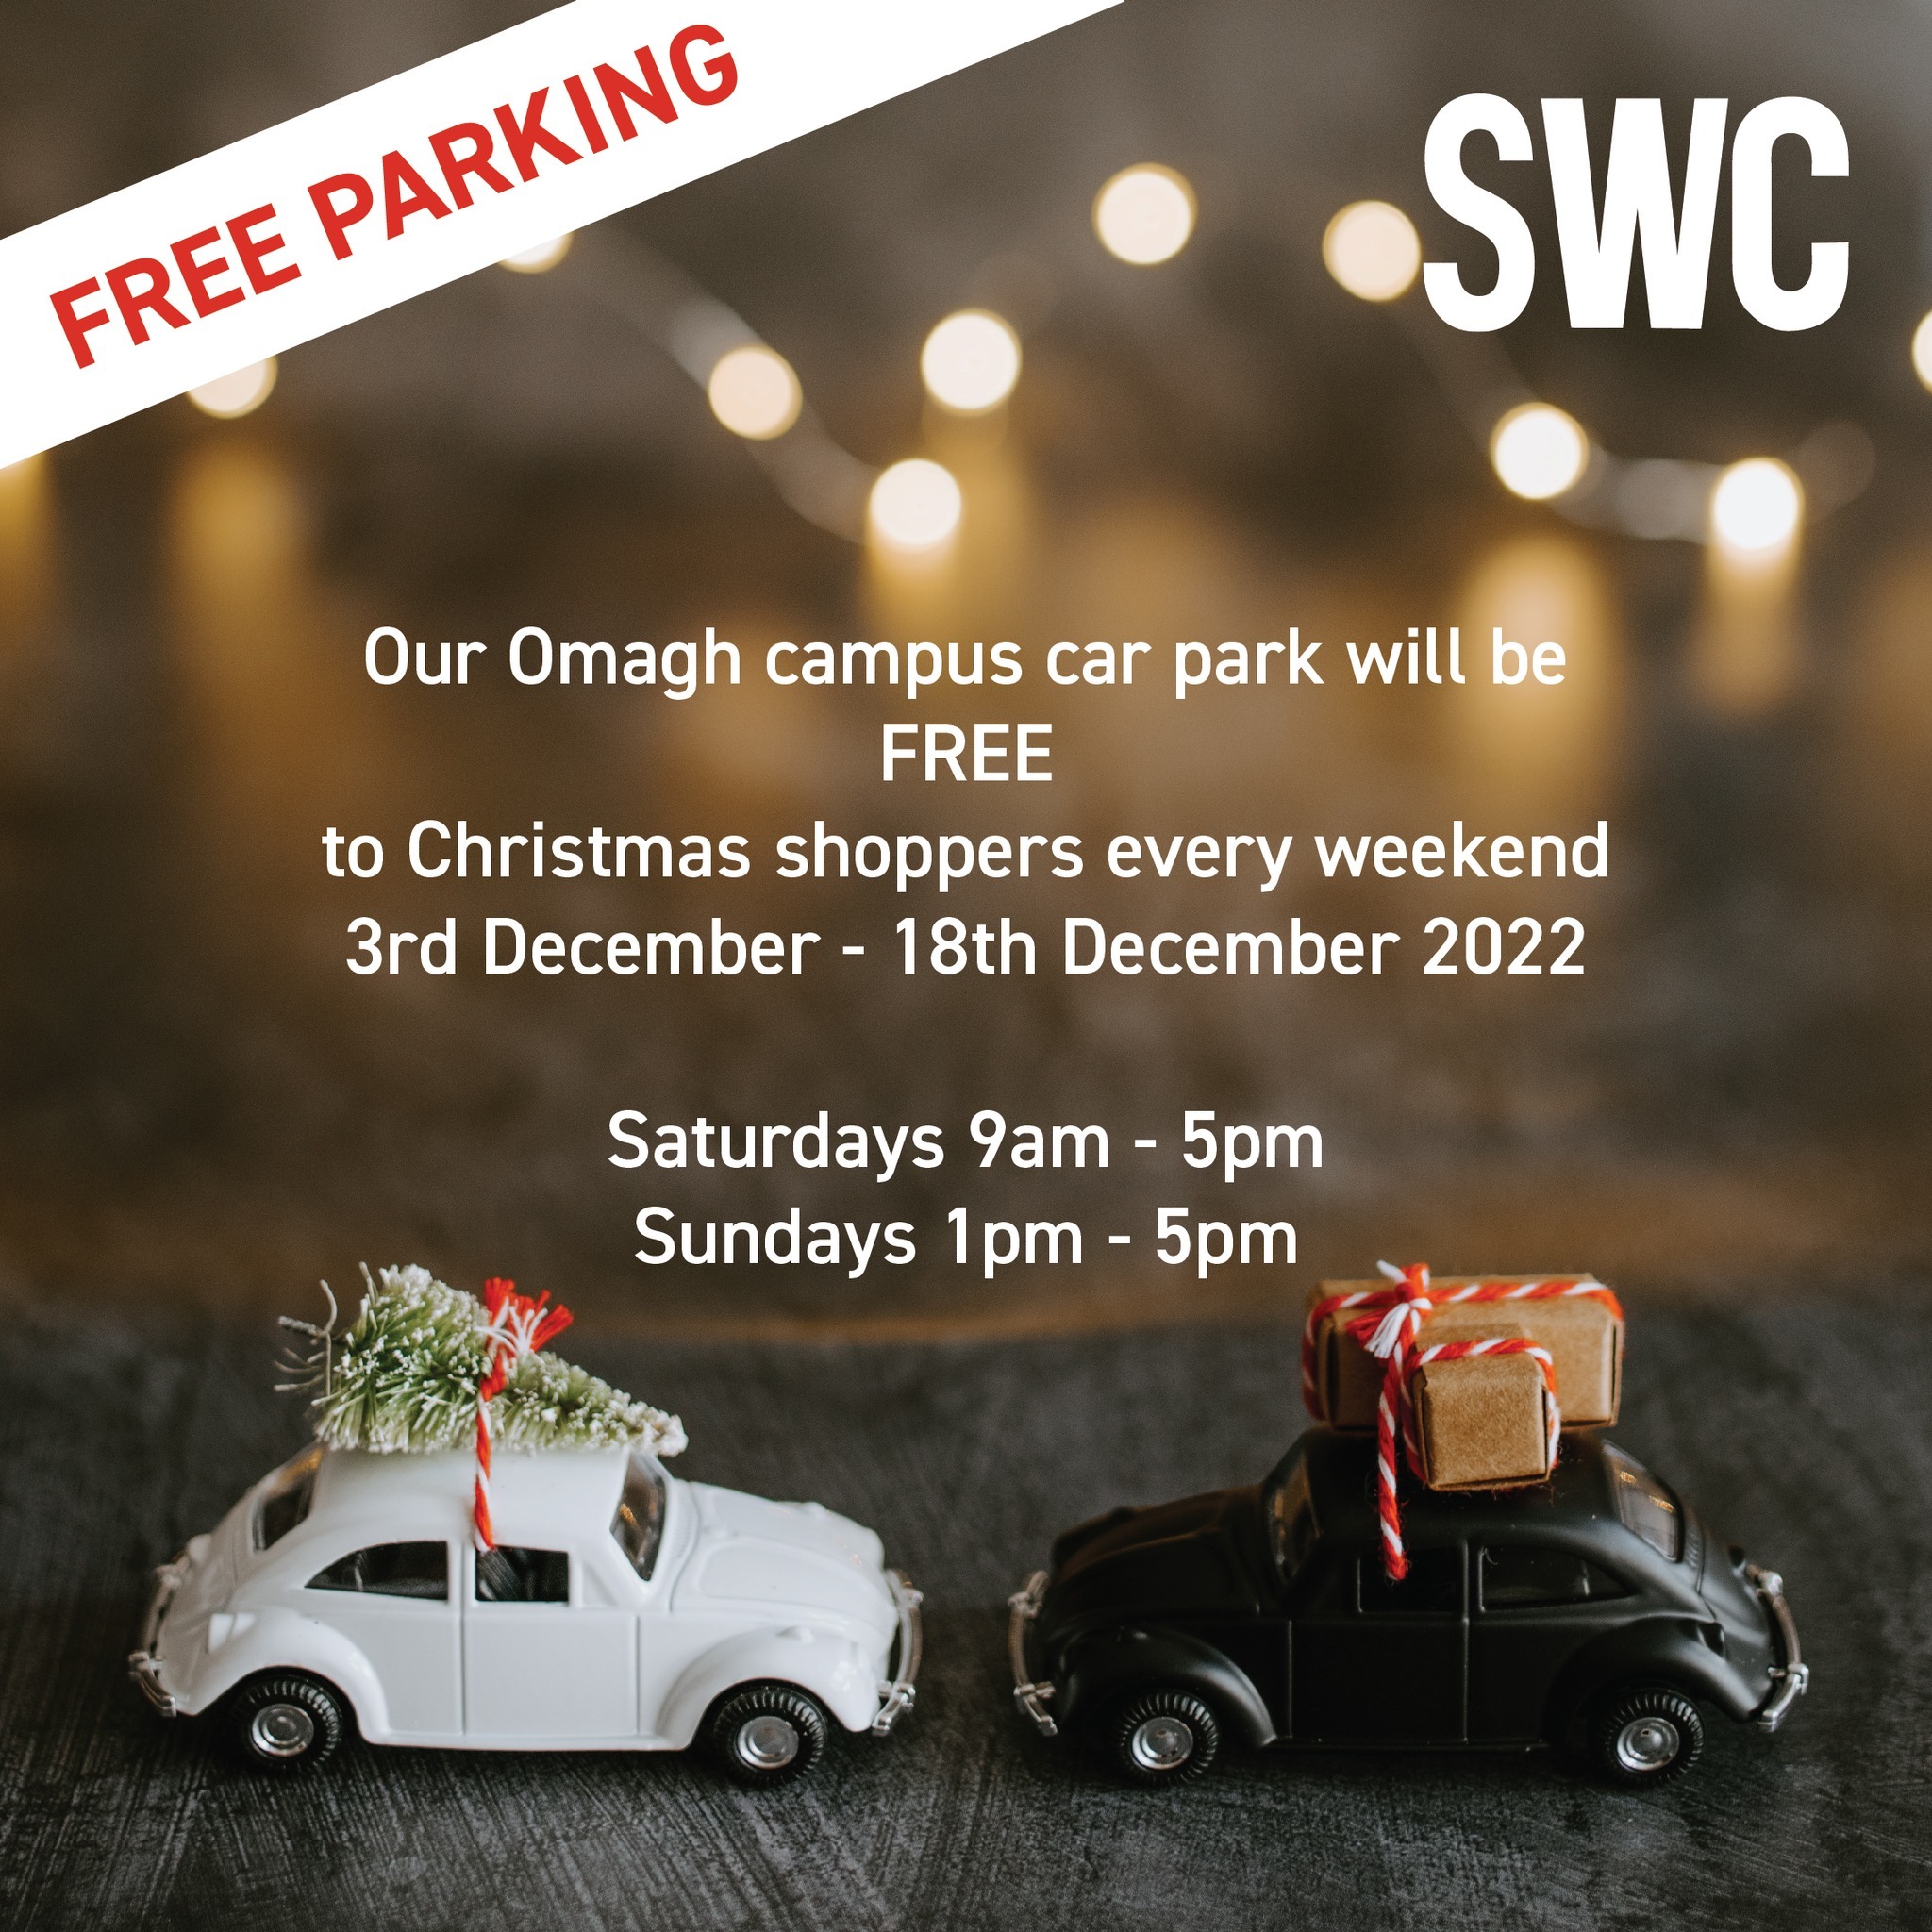 Free Parking SWC Omagh Christmas 2022